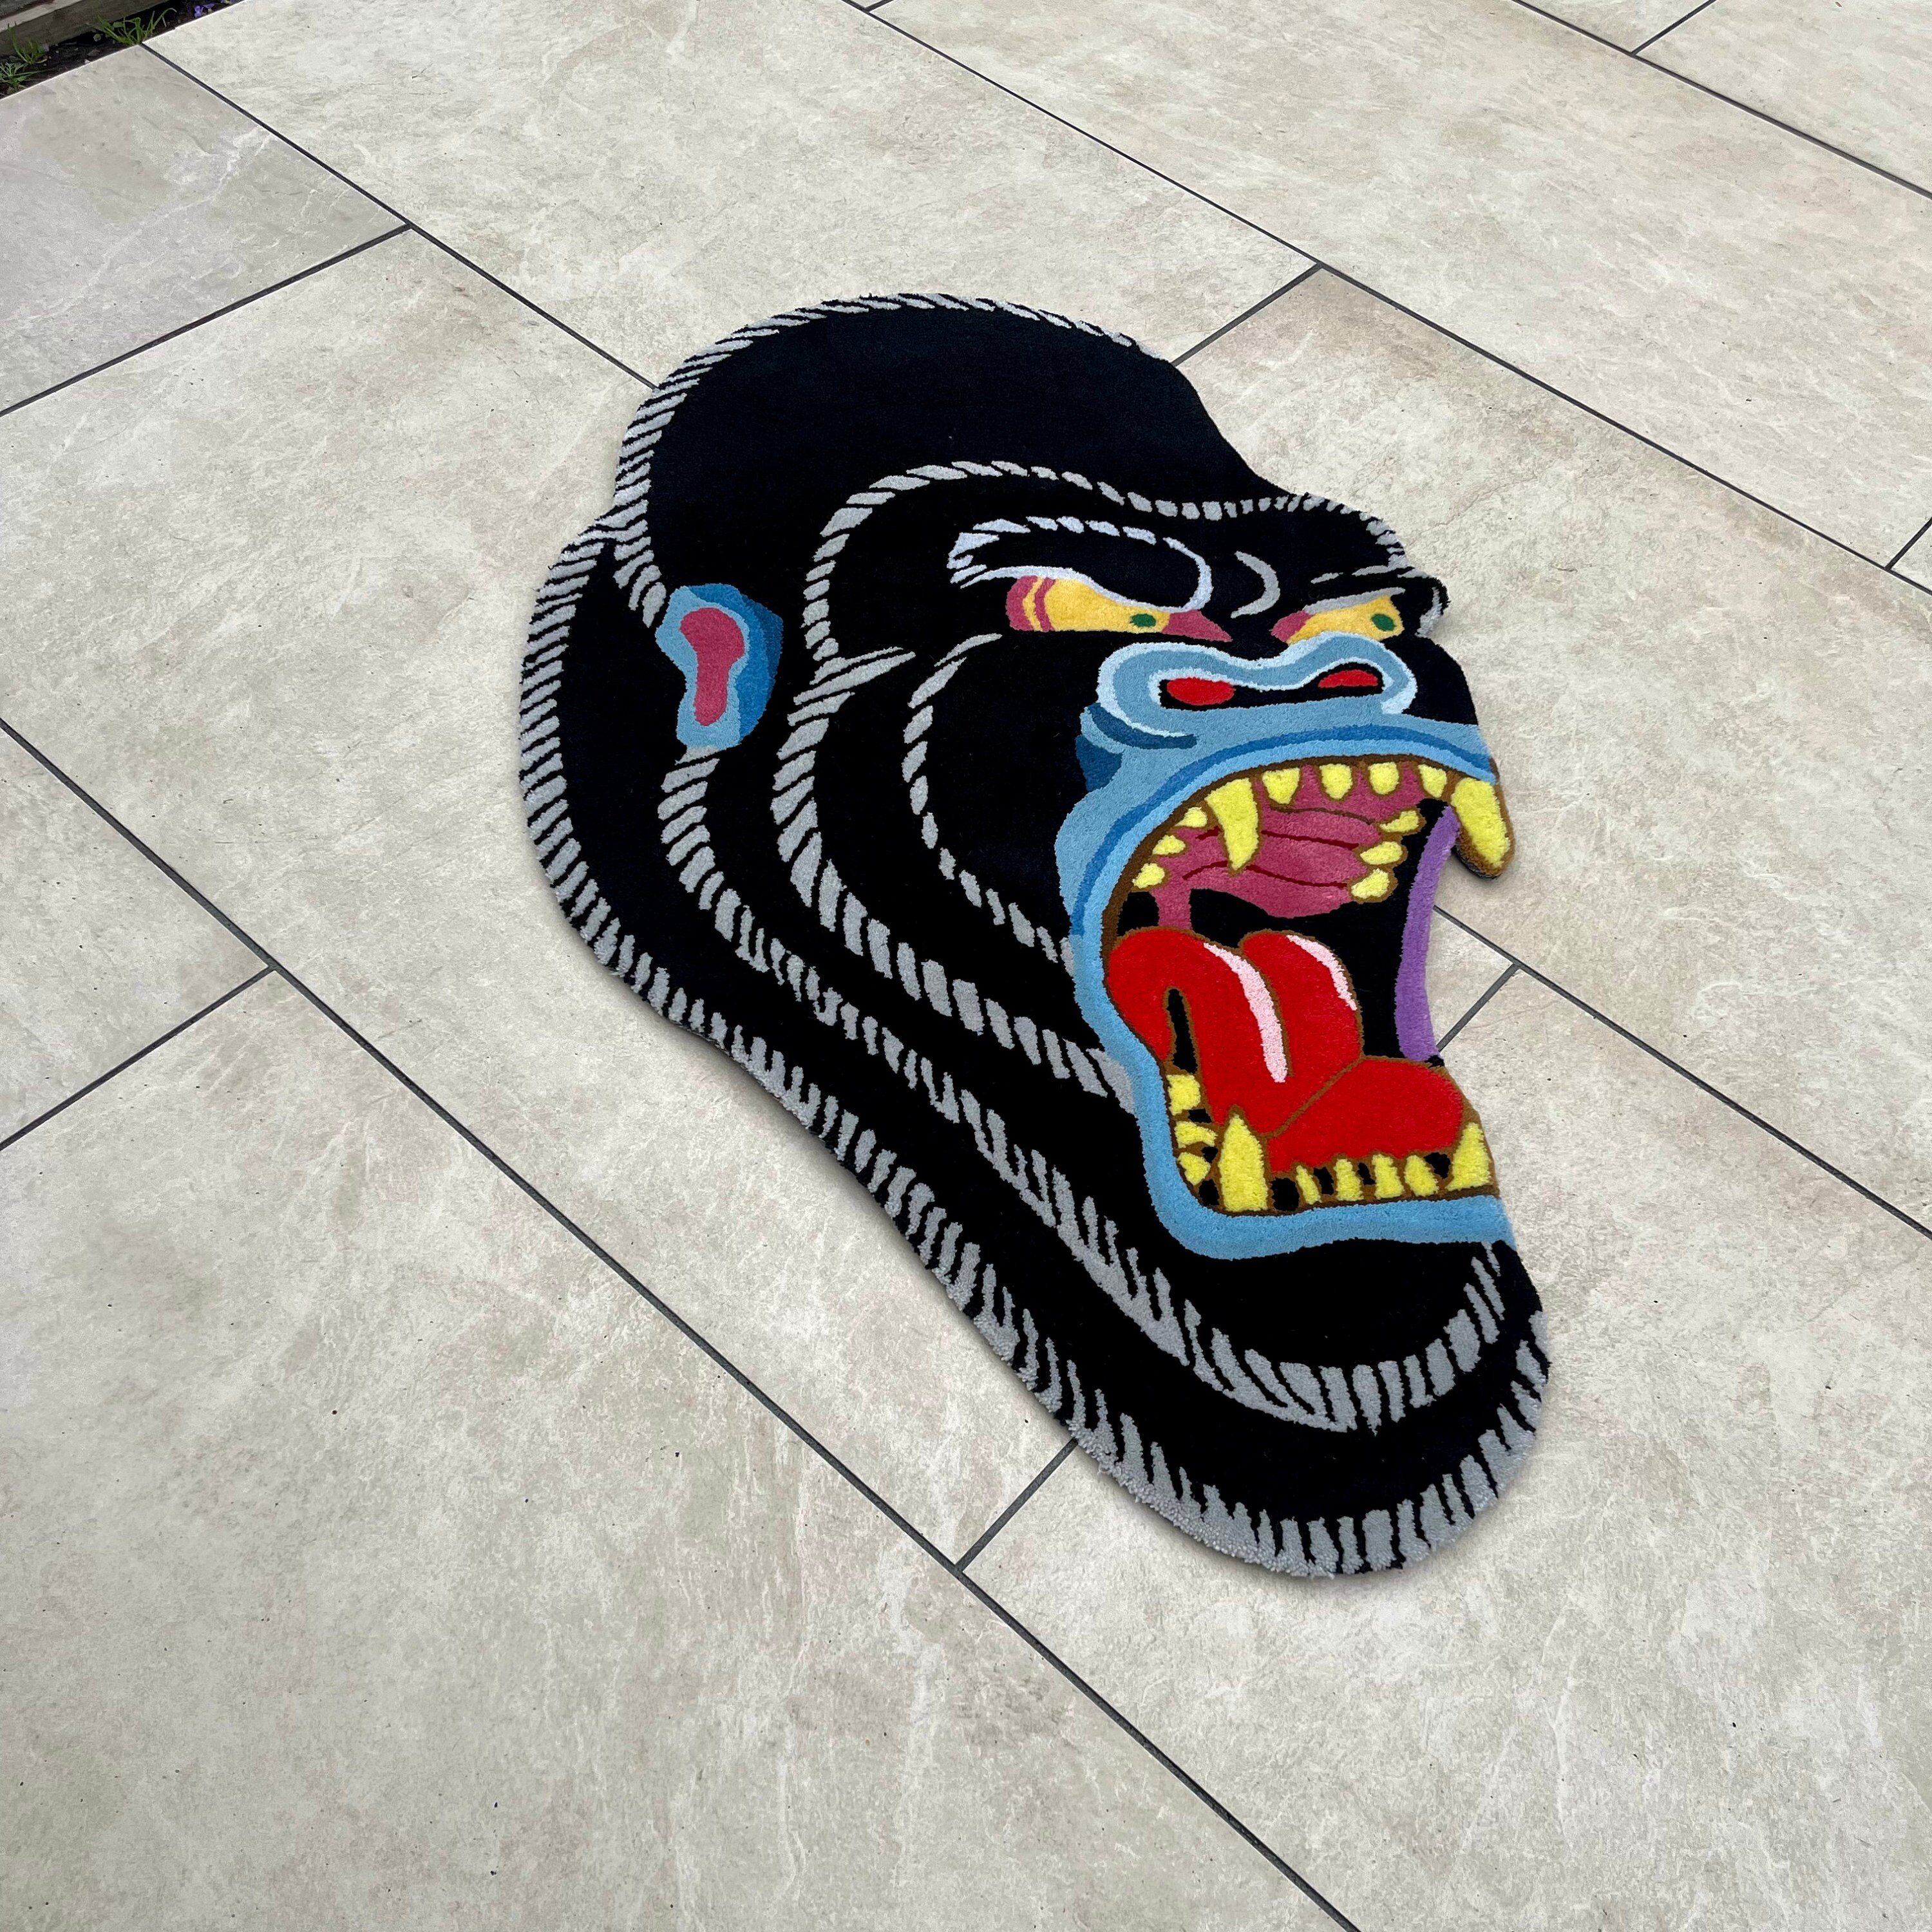 American Traditional Gorilla – Inked Rugs